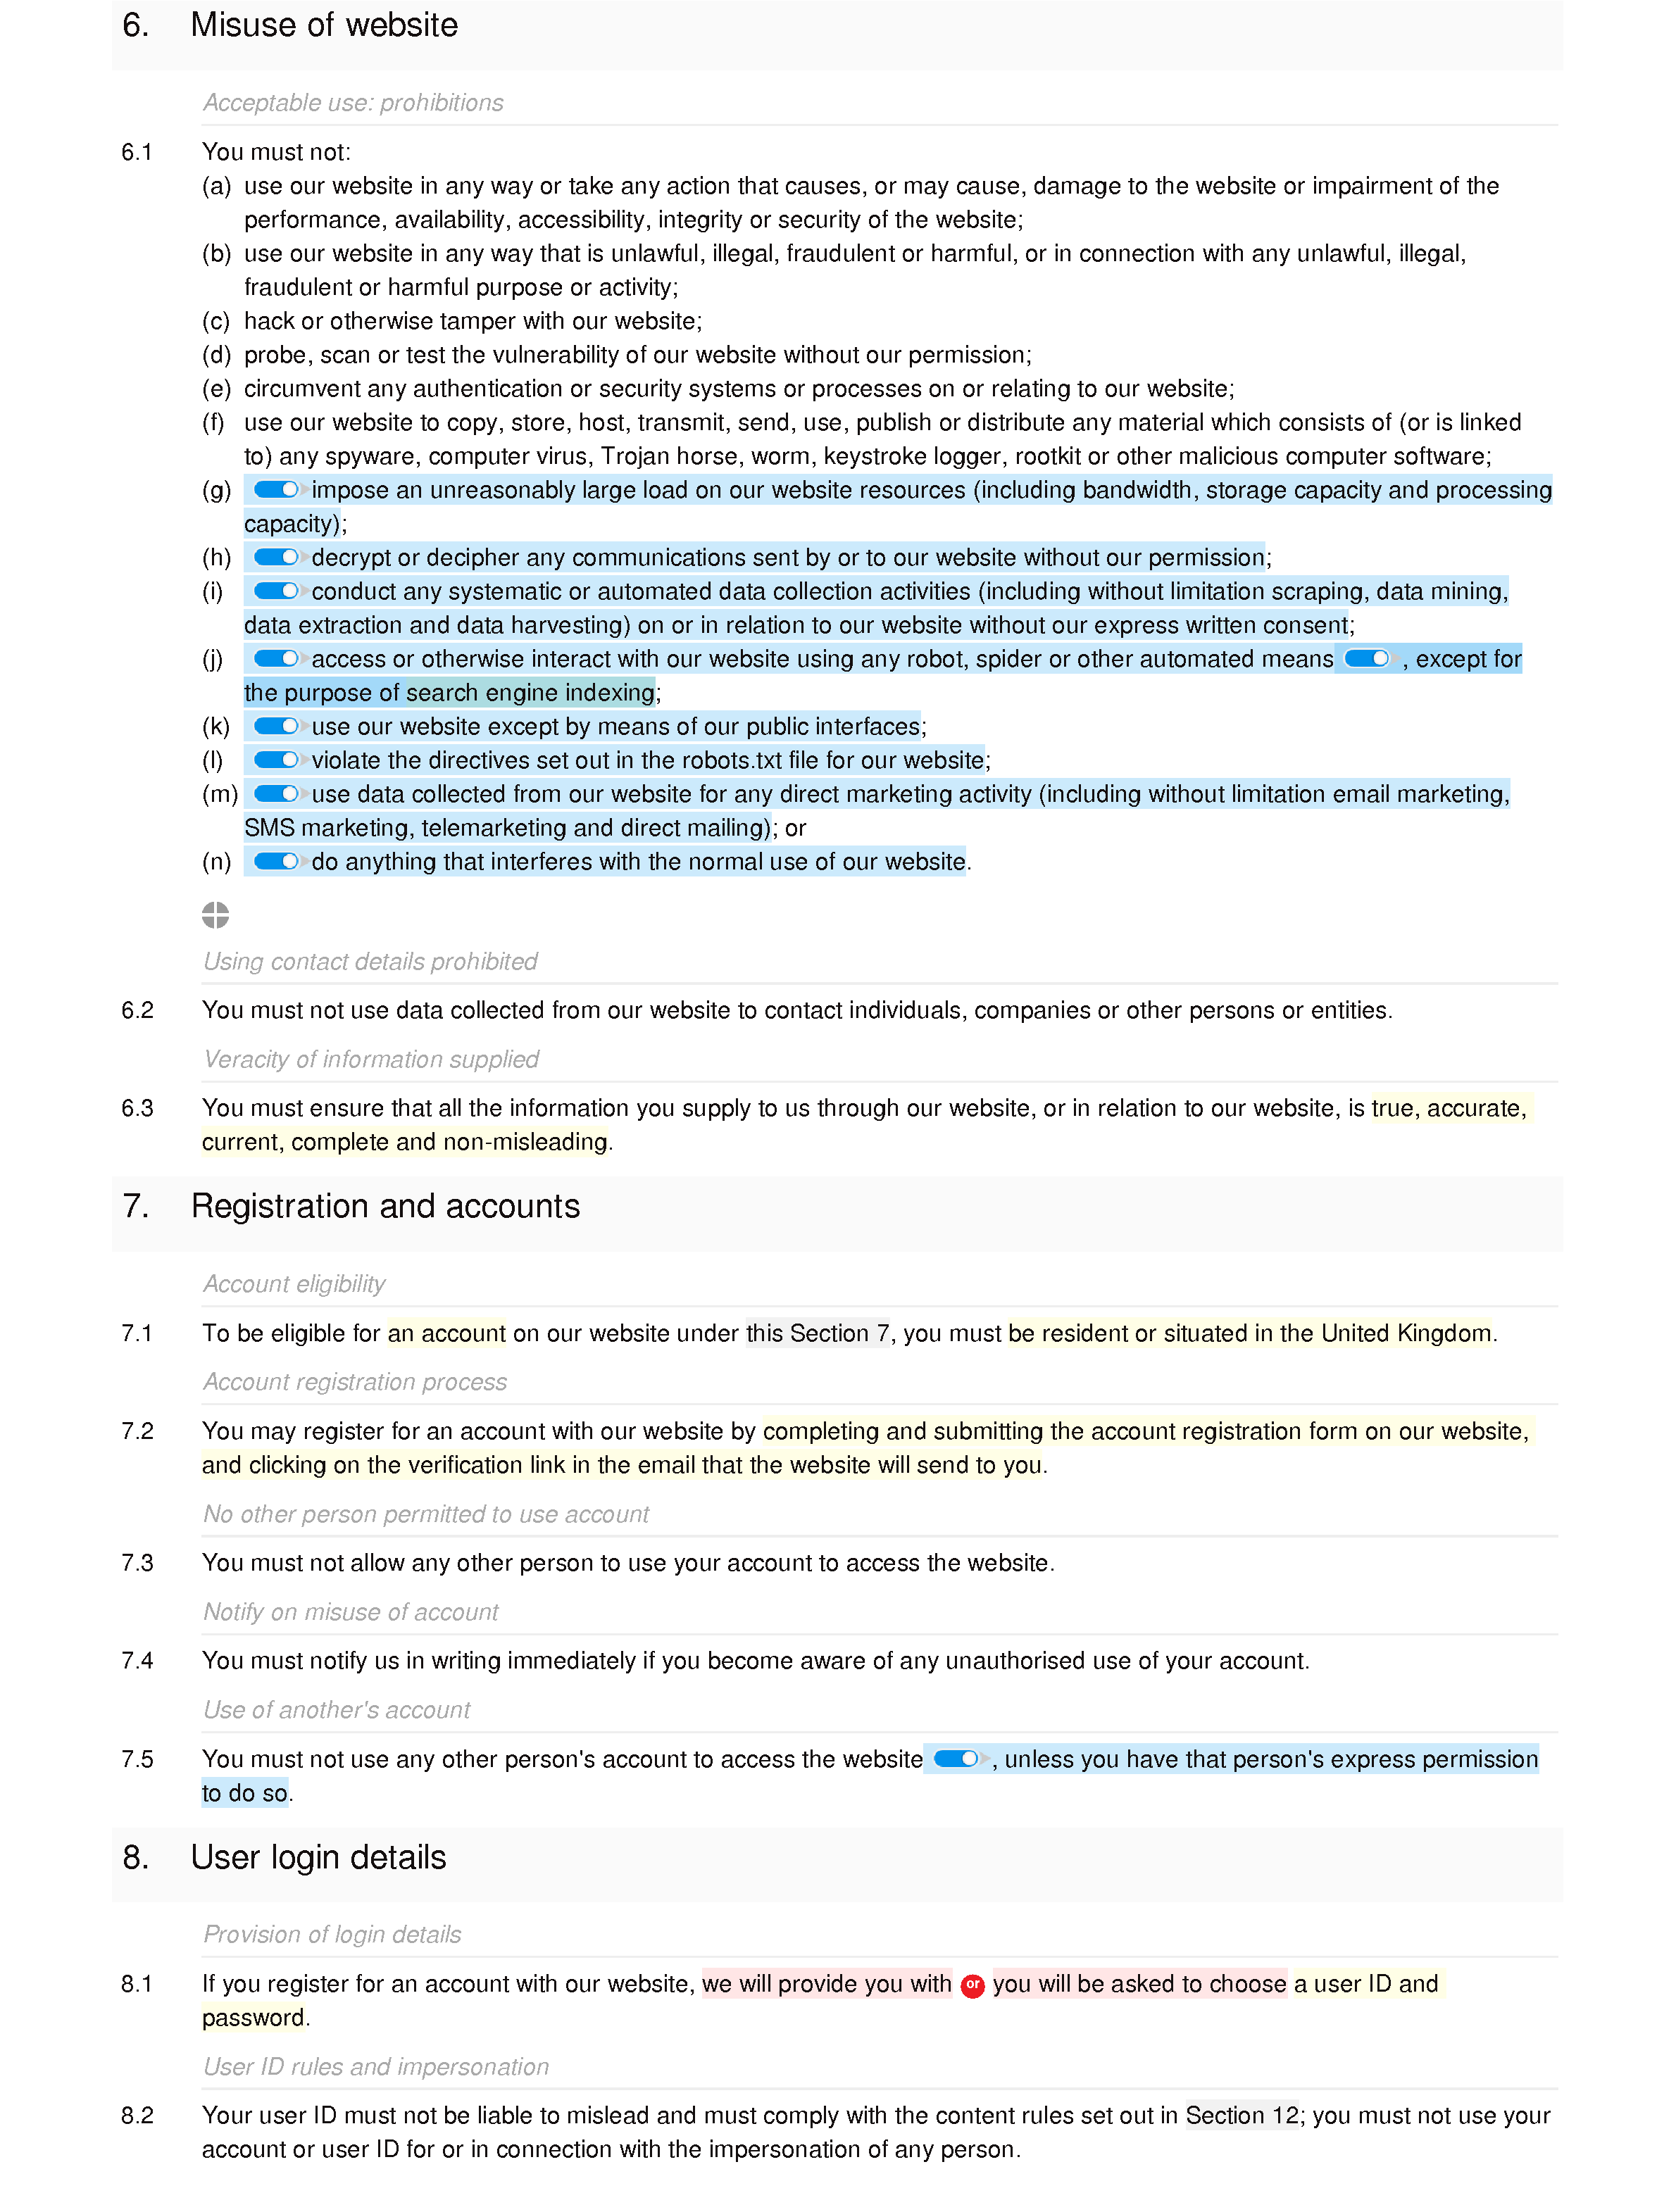 Blog terms and conditions document editor preview